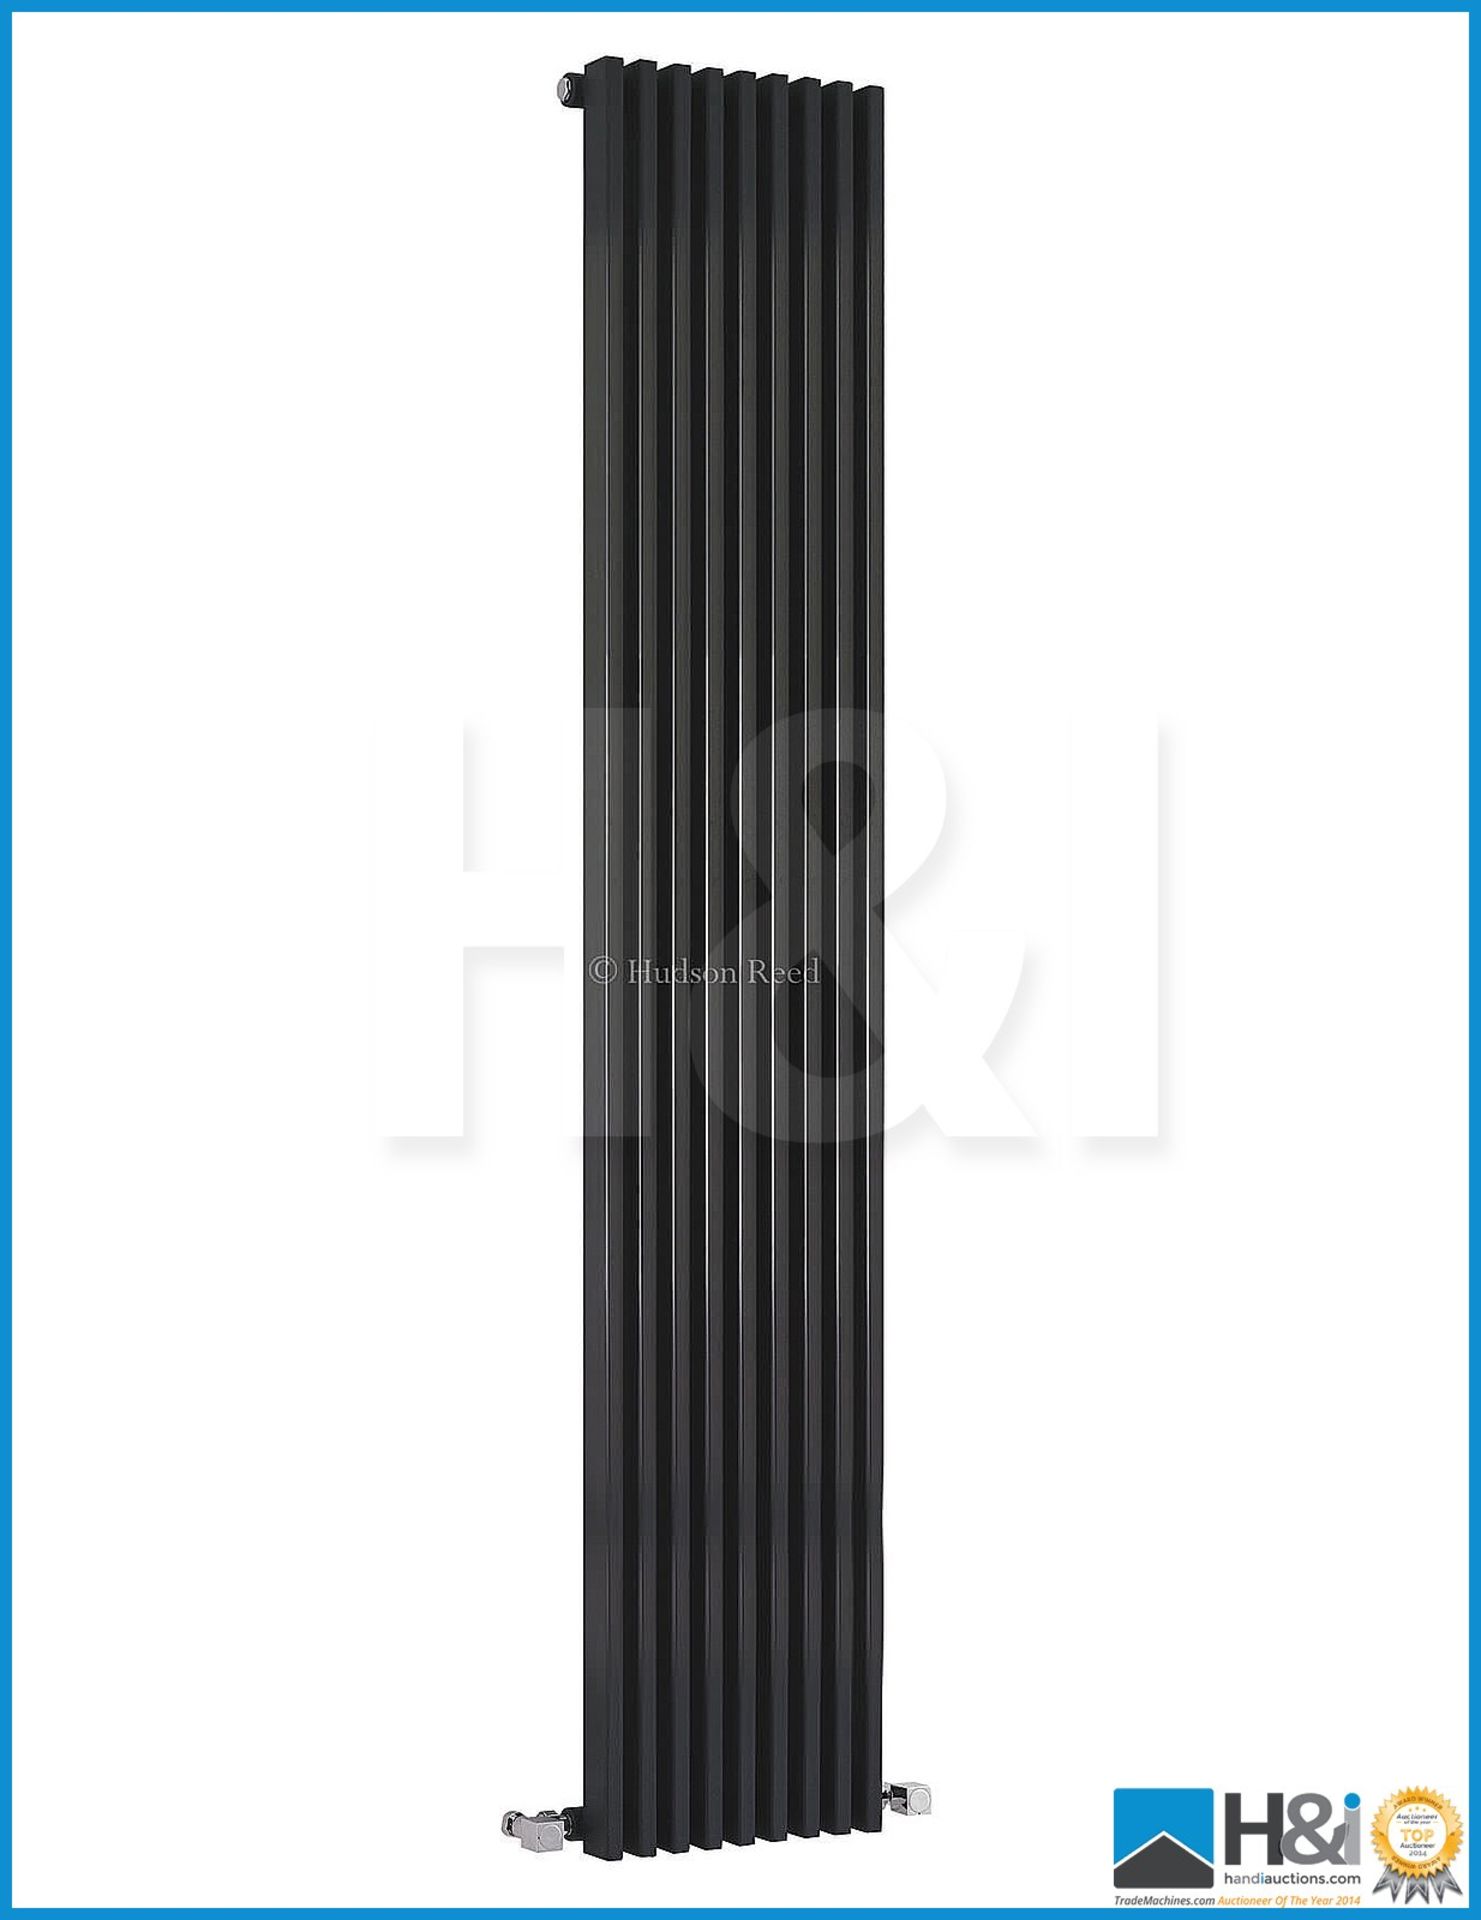 Hudson Reed HLB90 Parallel radiator in gloss black 1800x300 - New and boxed. Suggested Manufacturers